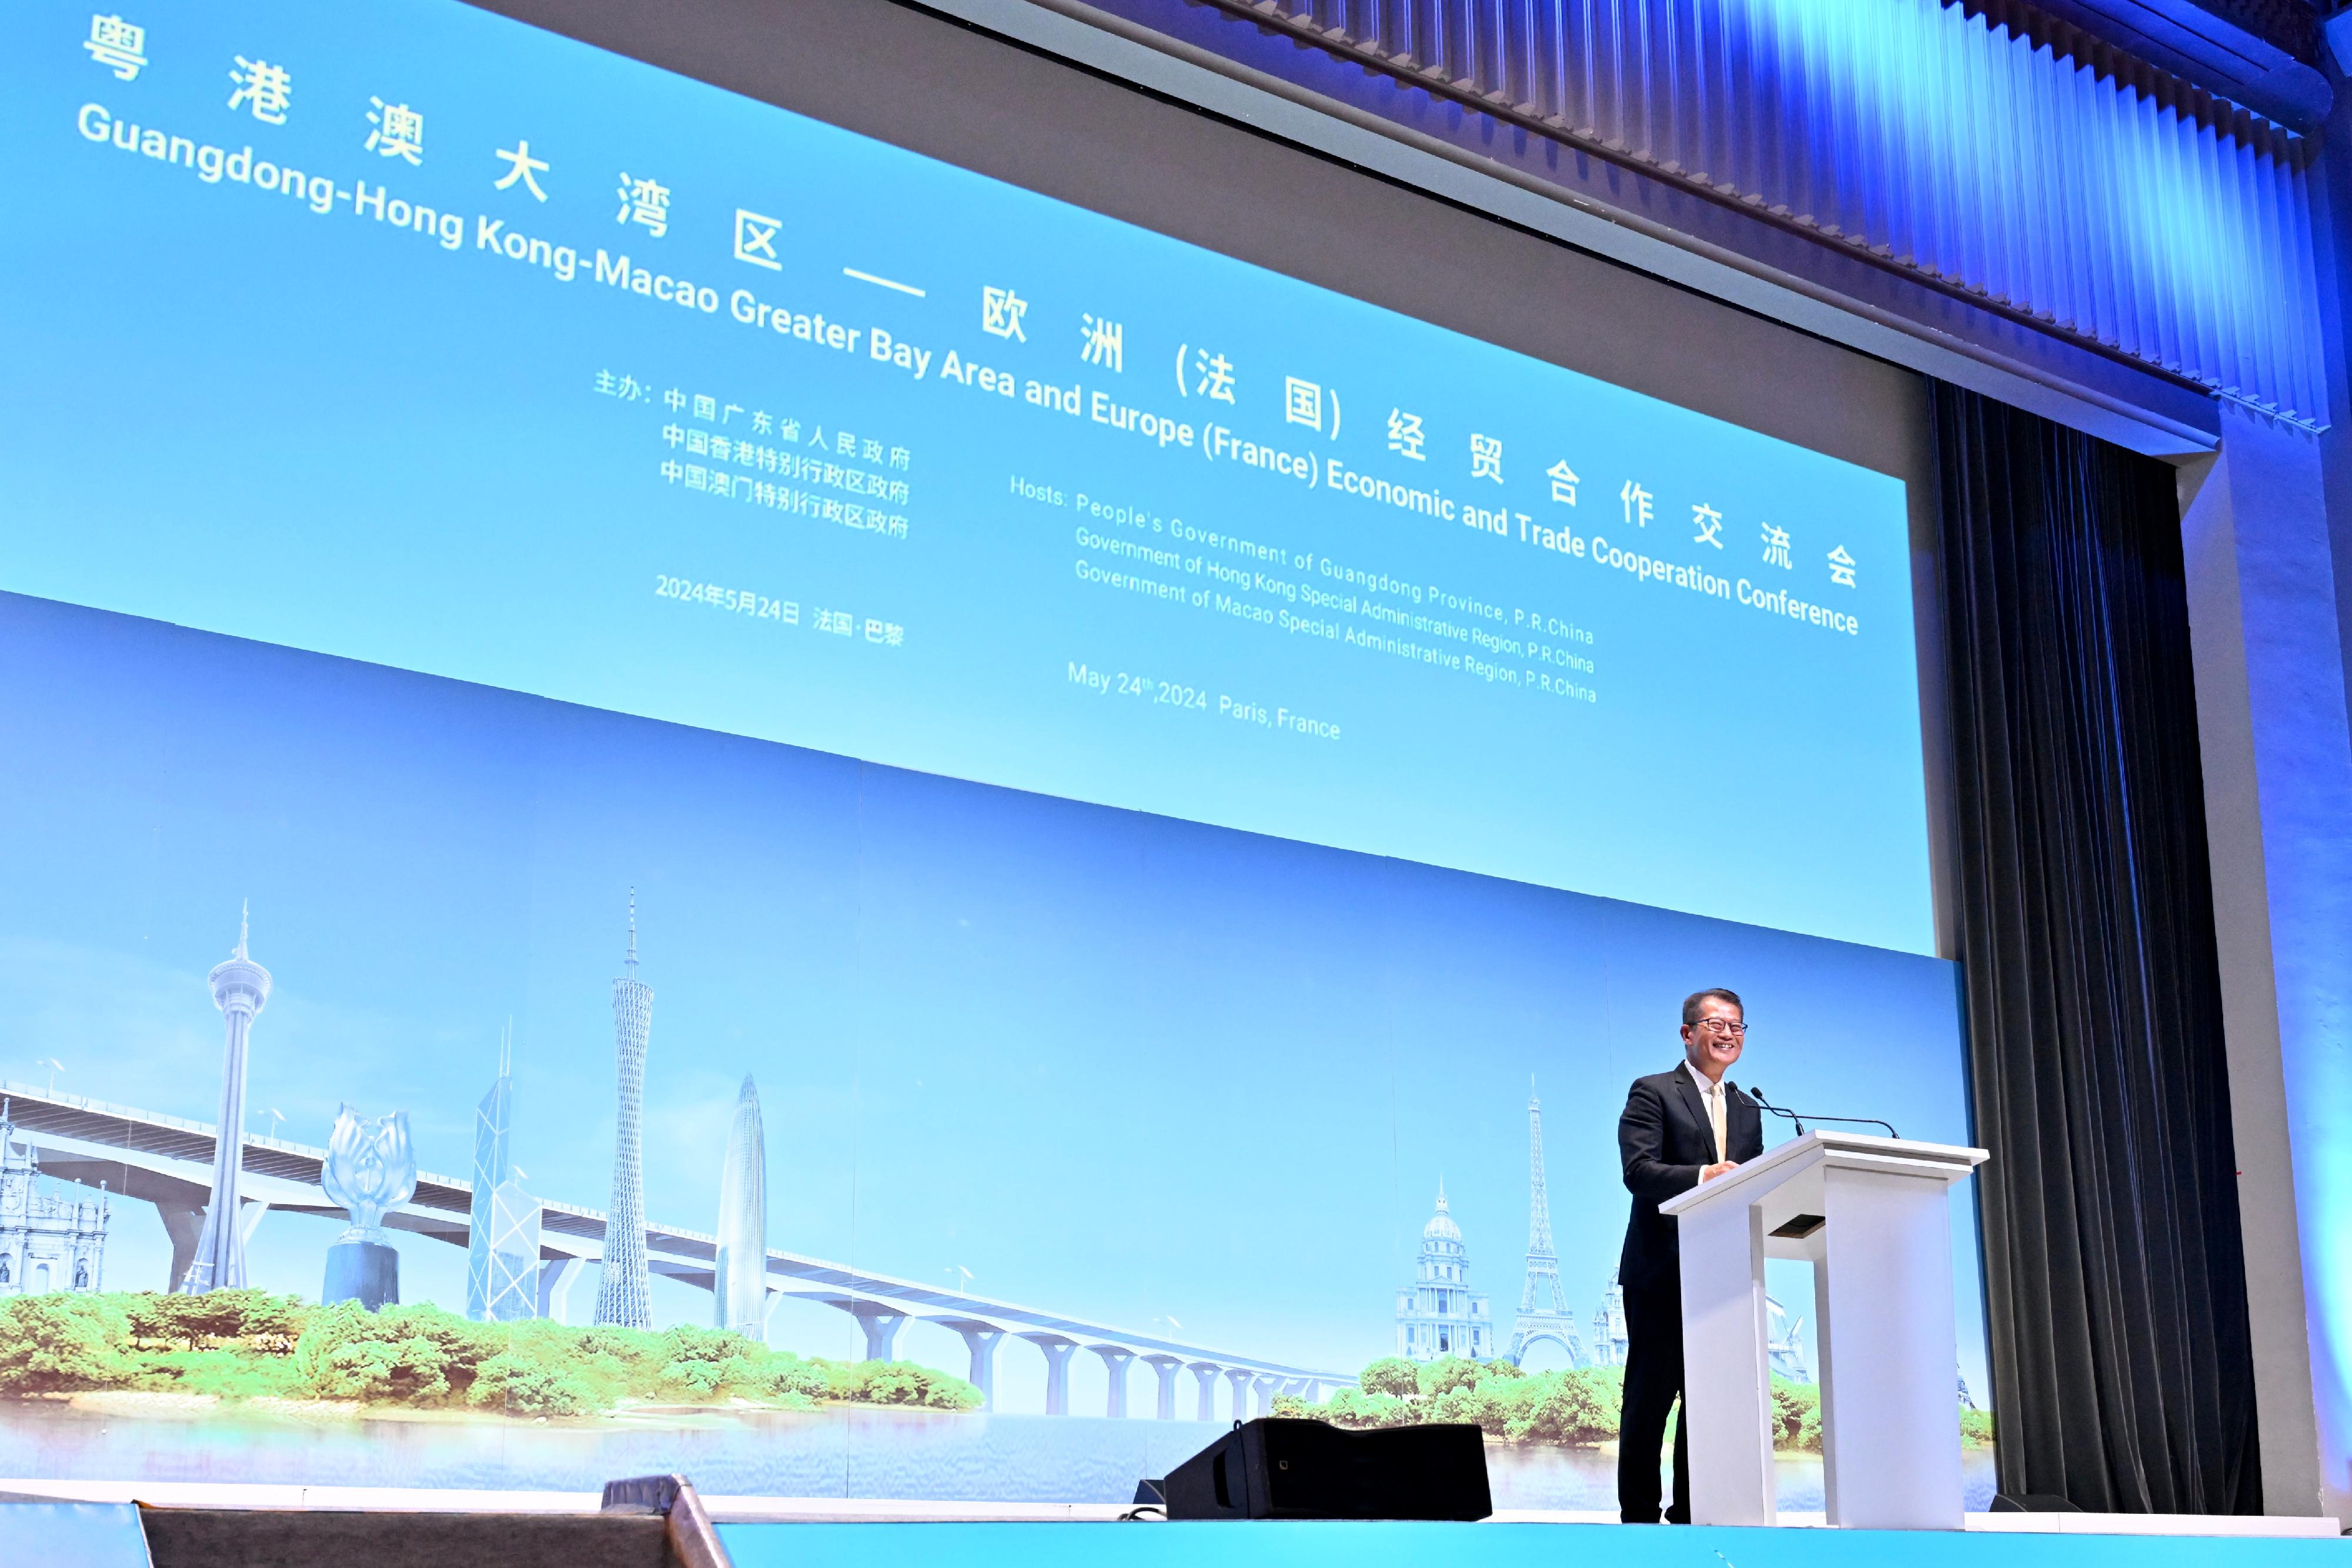 The Financial Secretary, Mr Paul Chan, speaks at the Guangdong-Hong Kong-Macao Greater Bay Area and Europe (France) Economic and Trade Cooperation Conference in Paris, France today (May 24, Paris time). 